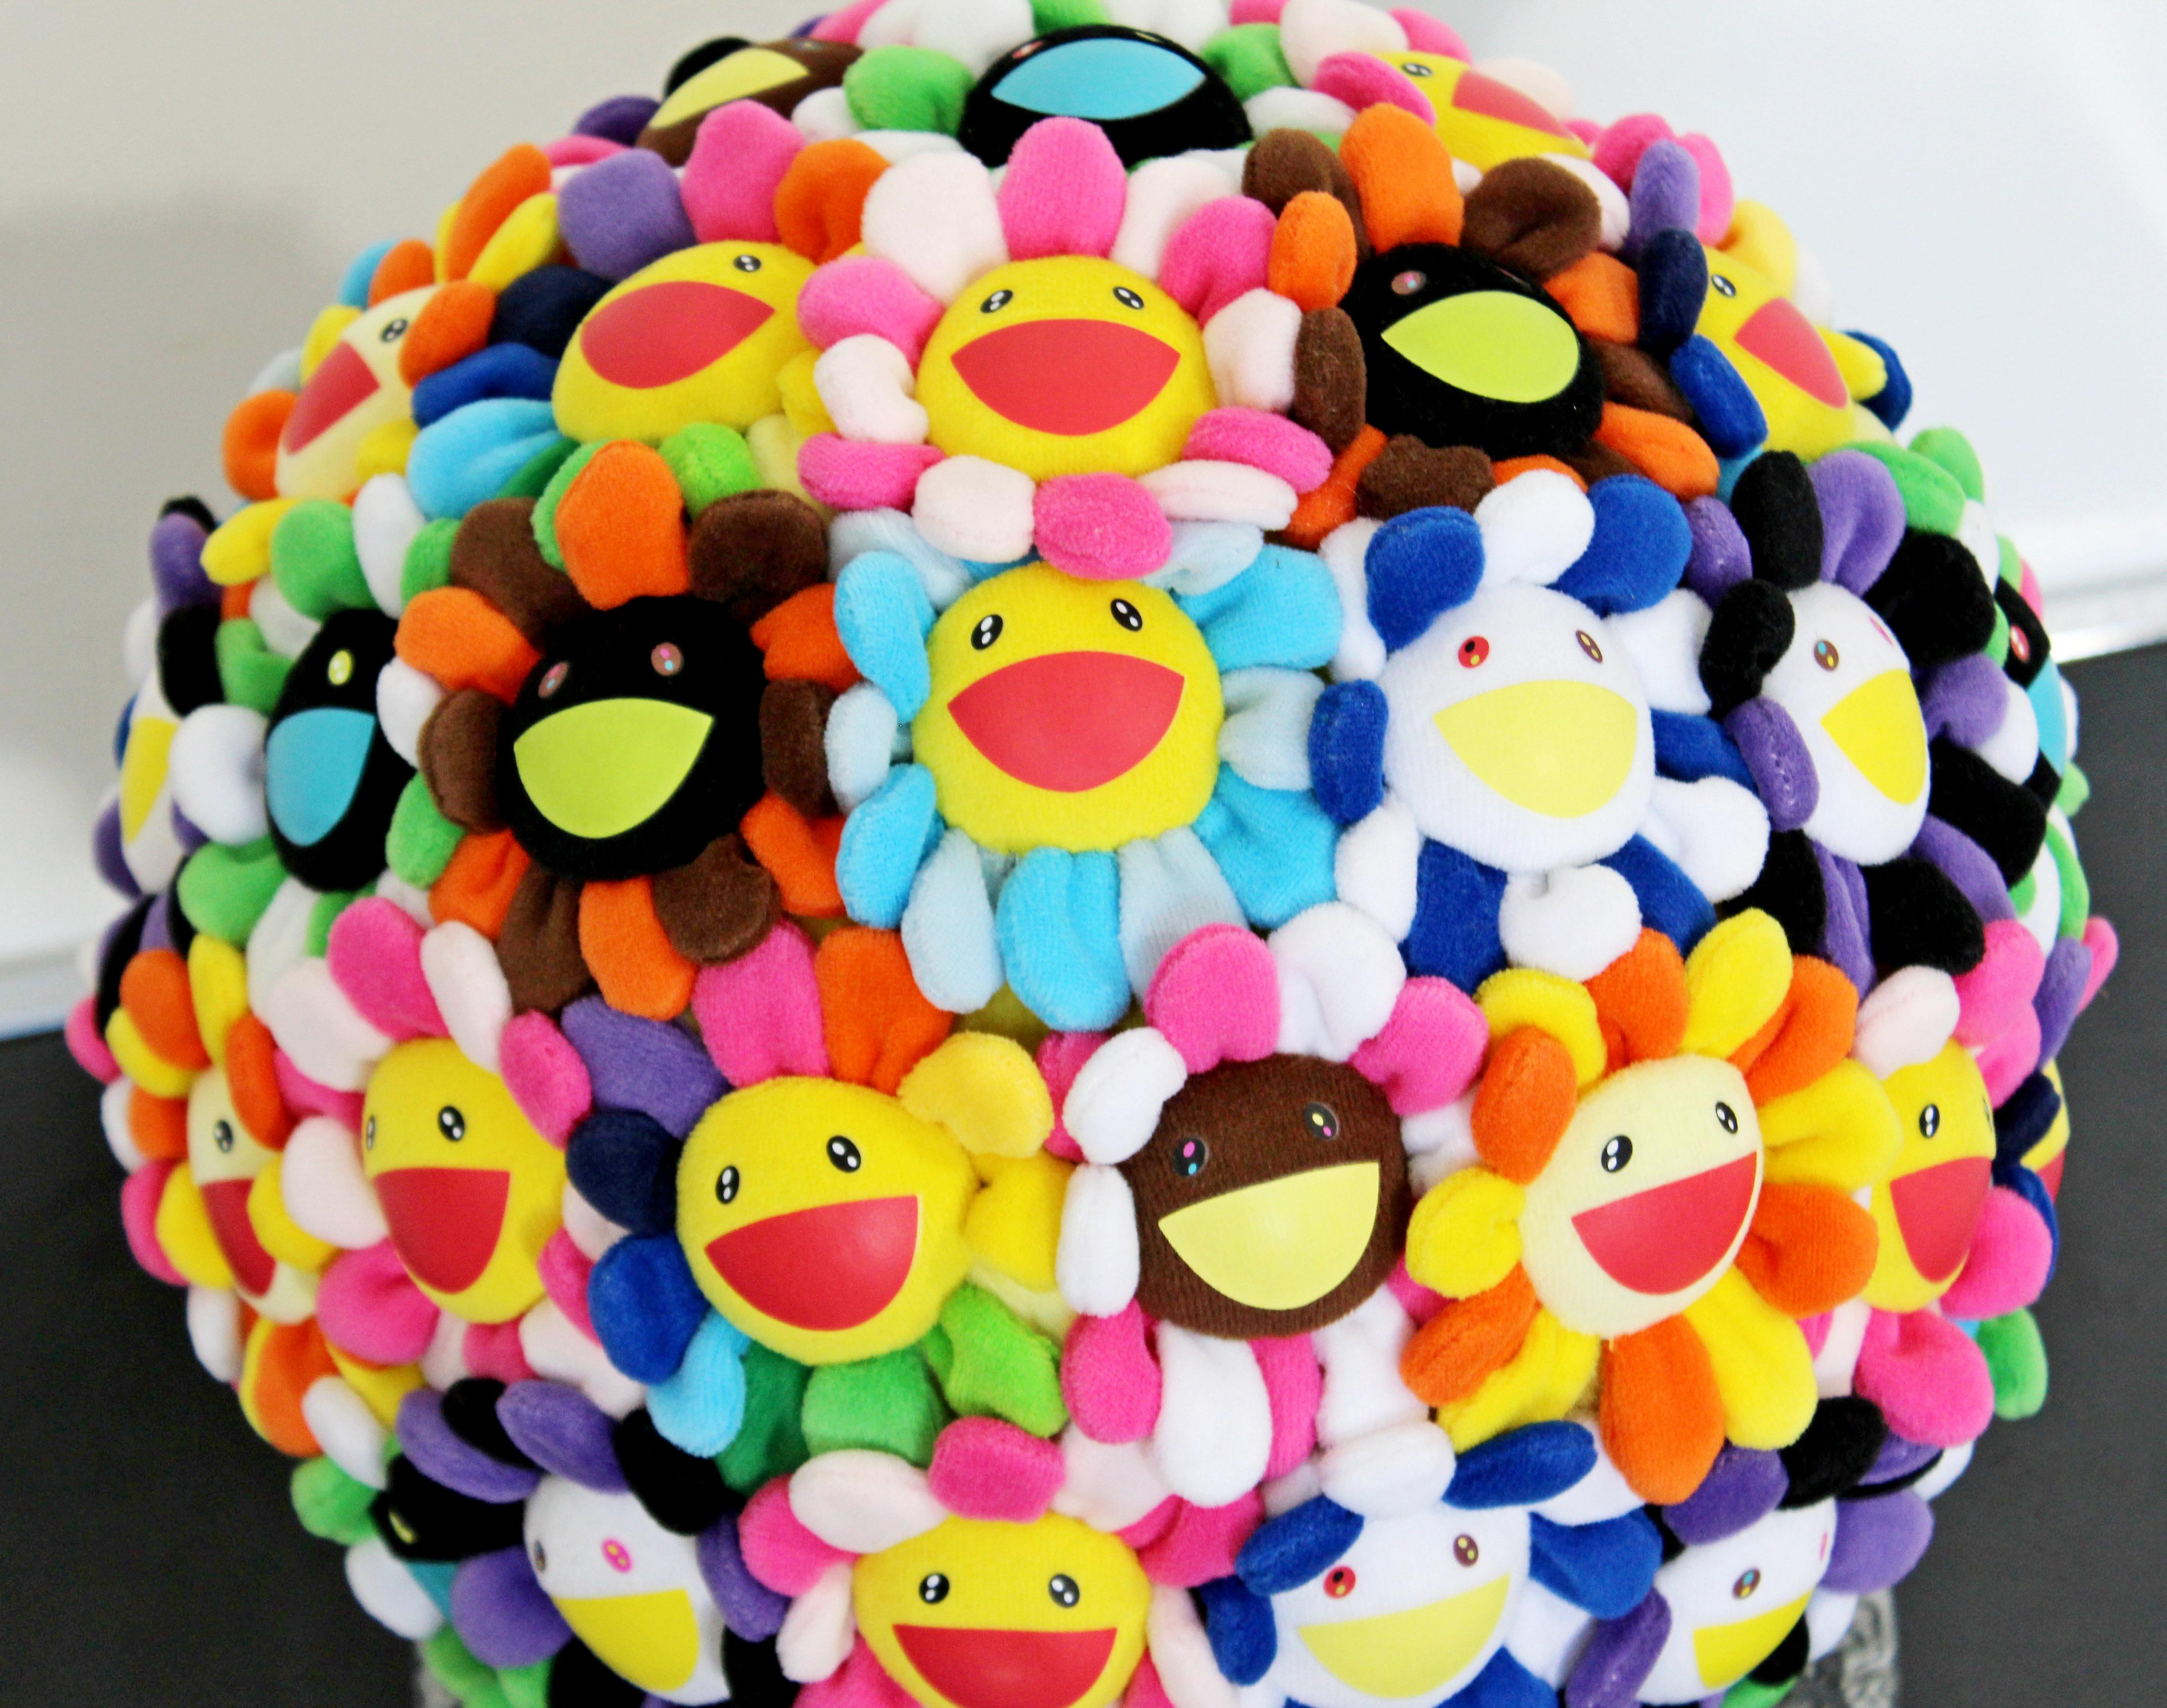 For your consideration is a phenomenally whimsical, plush, polyester flowerball, by Takashi Murakami, certified and numbered 95/300, circa 2008. In mint condition. The dimensions are 11